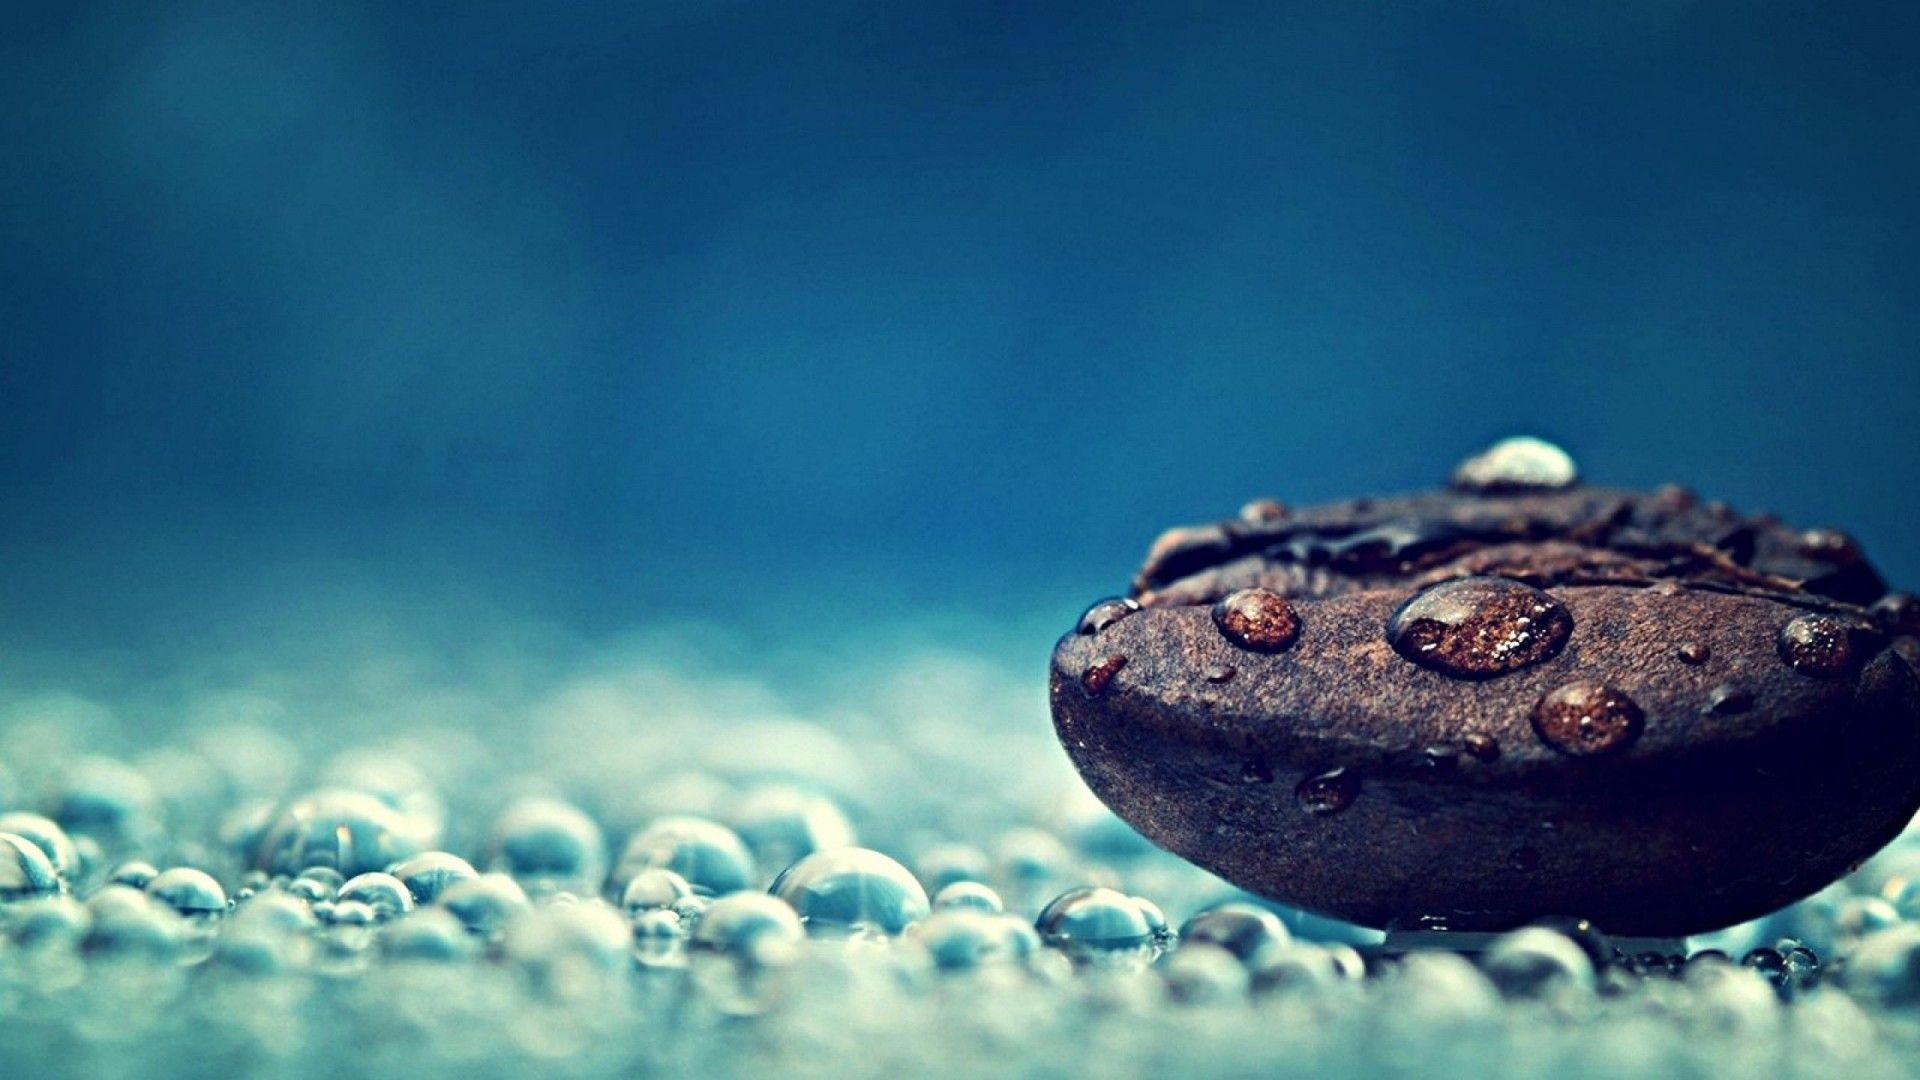 1920x1080 Water Droplets And Seed Macro Photography HD #521 Desktop Computer .